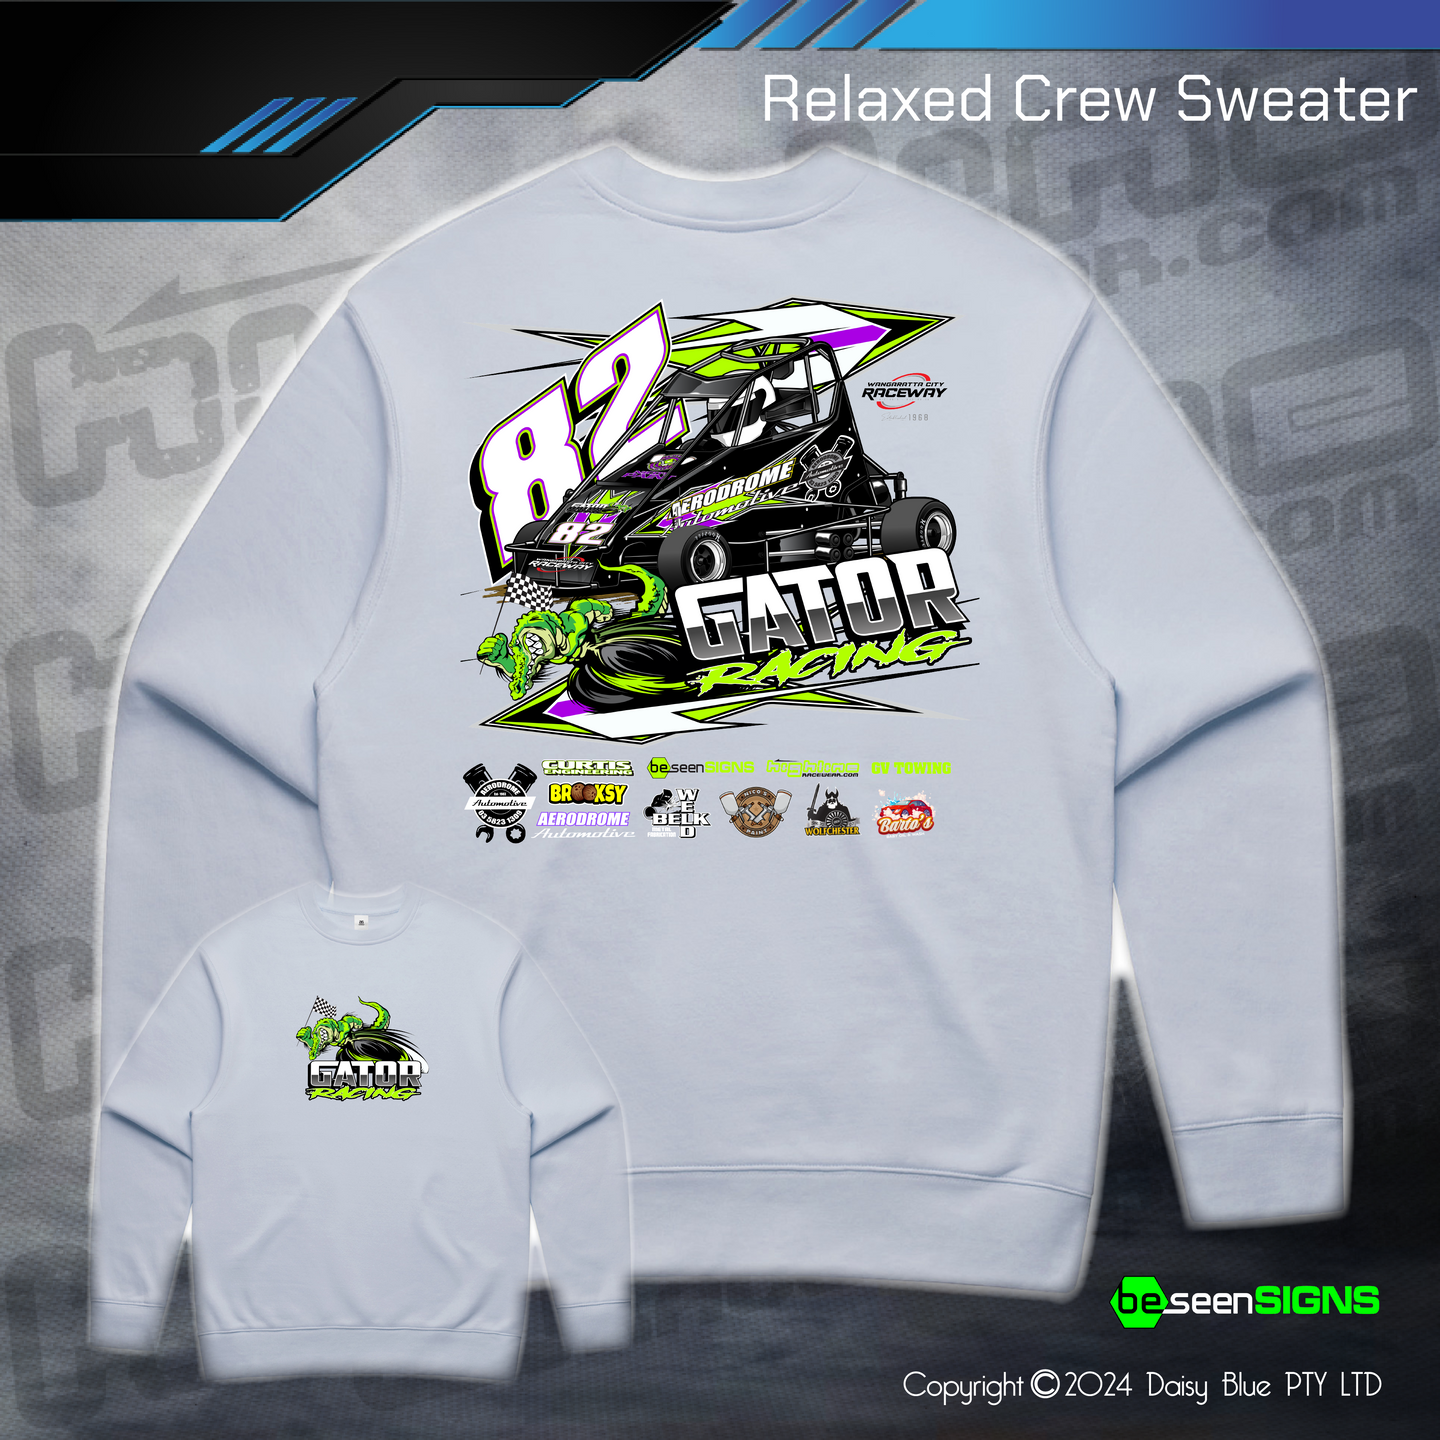 Relaxed Crew Sweater - Nate Roycroft